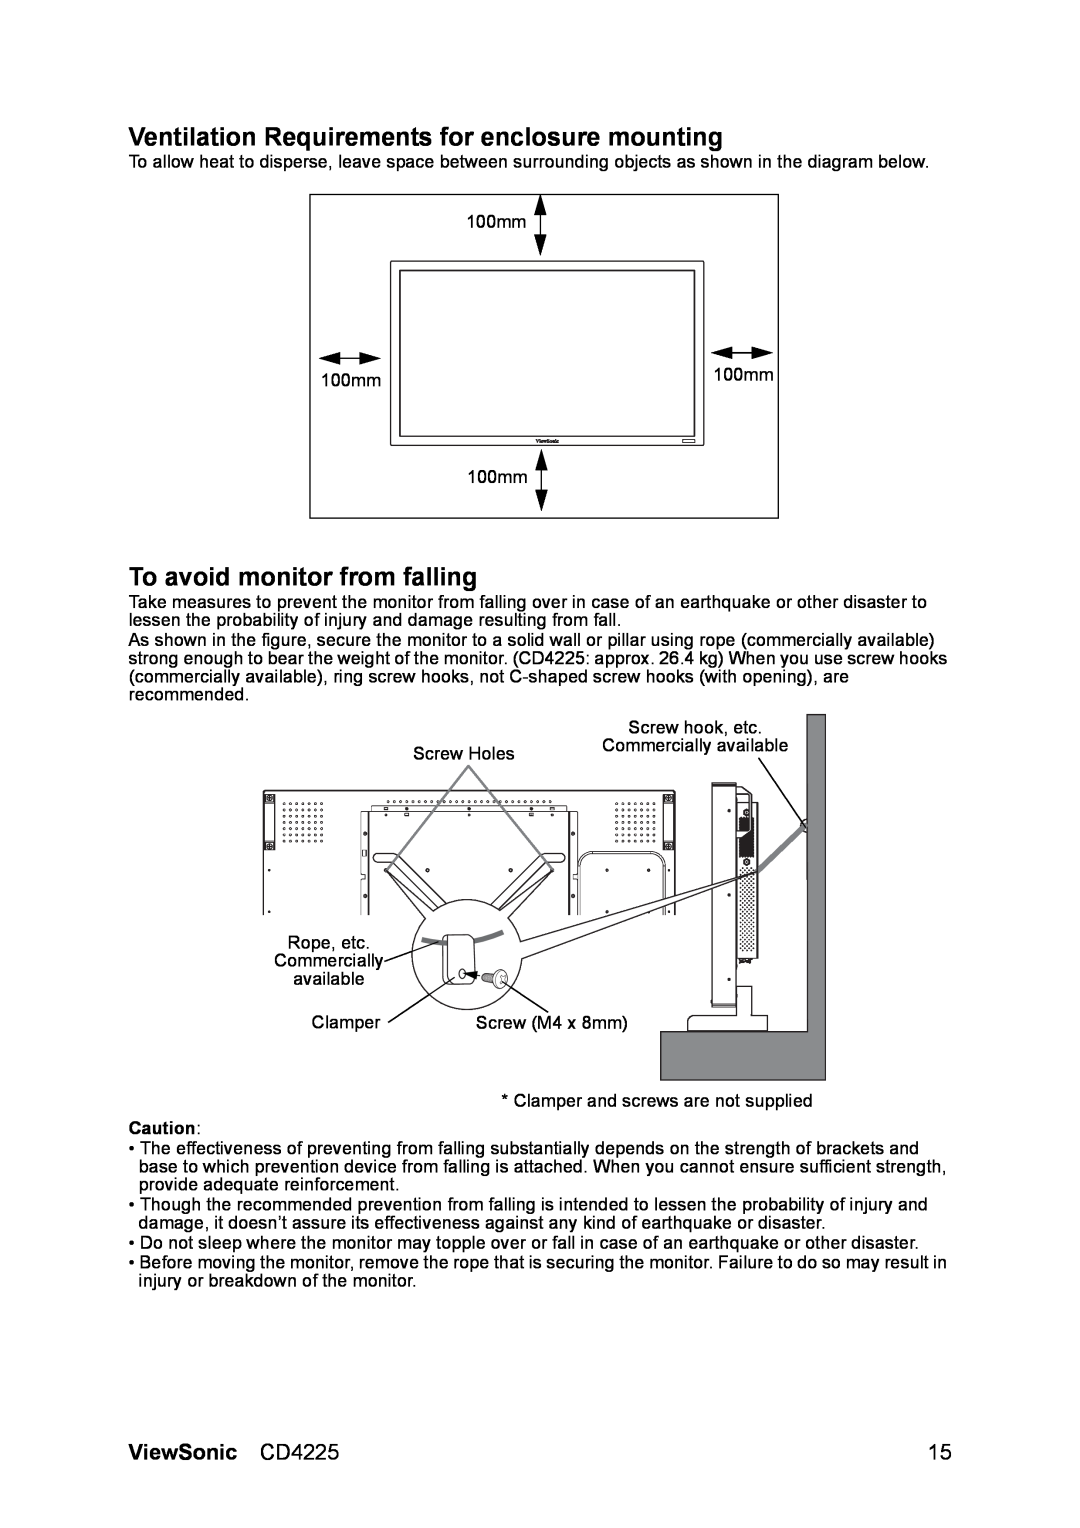 ViewSonic manual Ventilation Requirements for enclosure mounting, To avoid monitor from falling, ViewSonic CD4225 